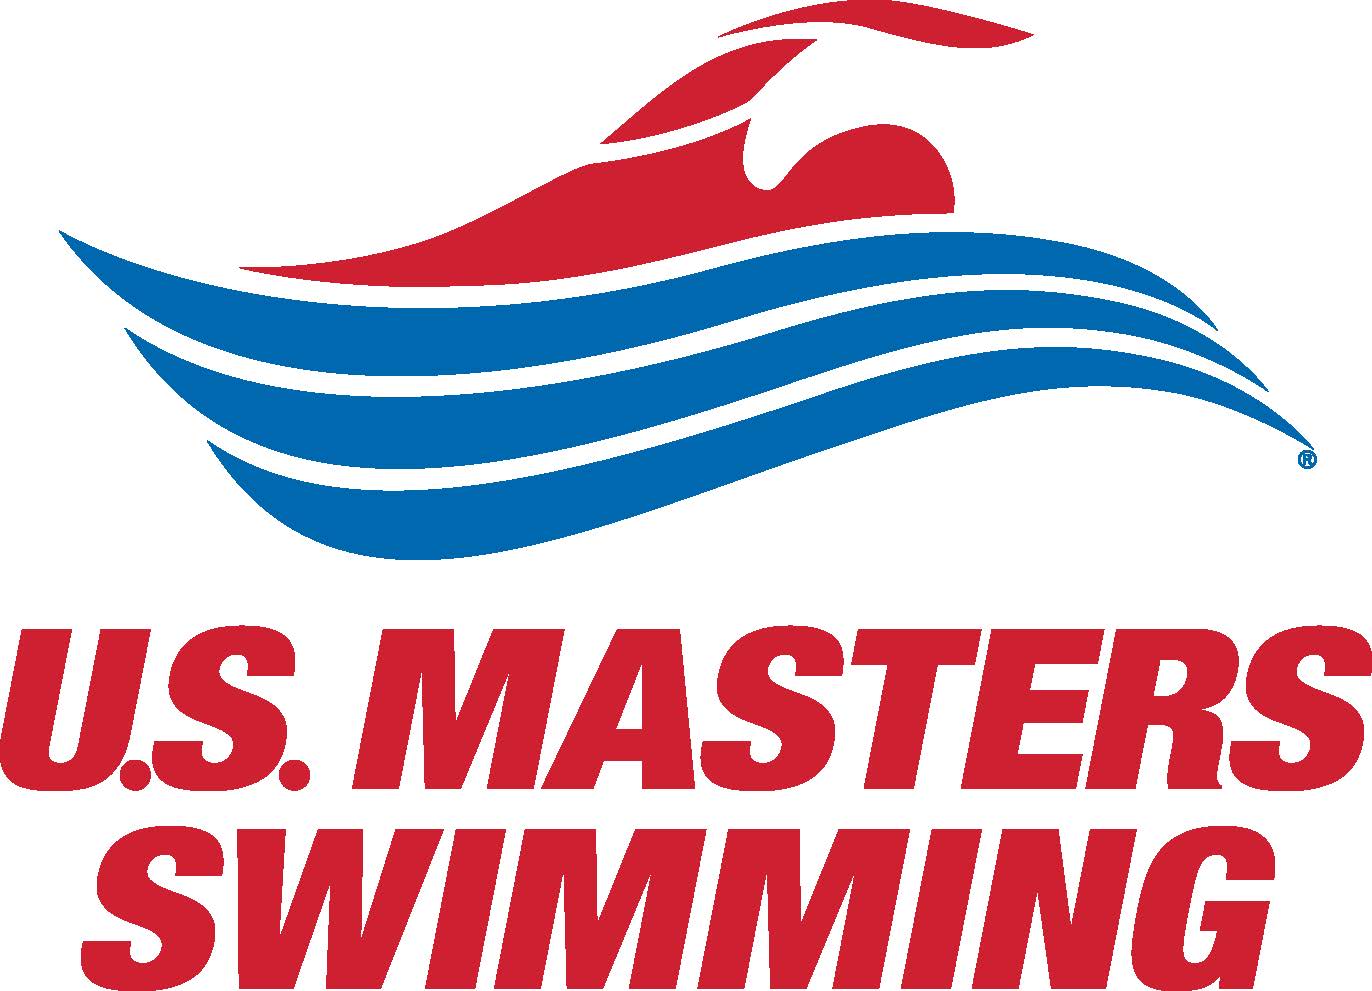 U.S. Masters Swimming will return to S.A. for Spring Nationals in 2025